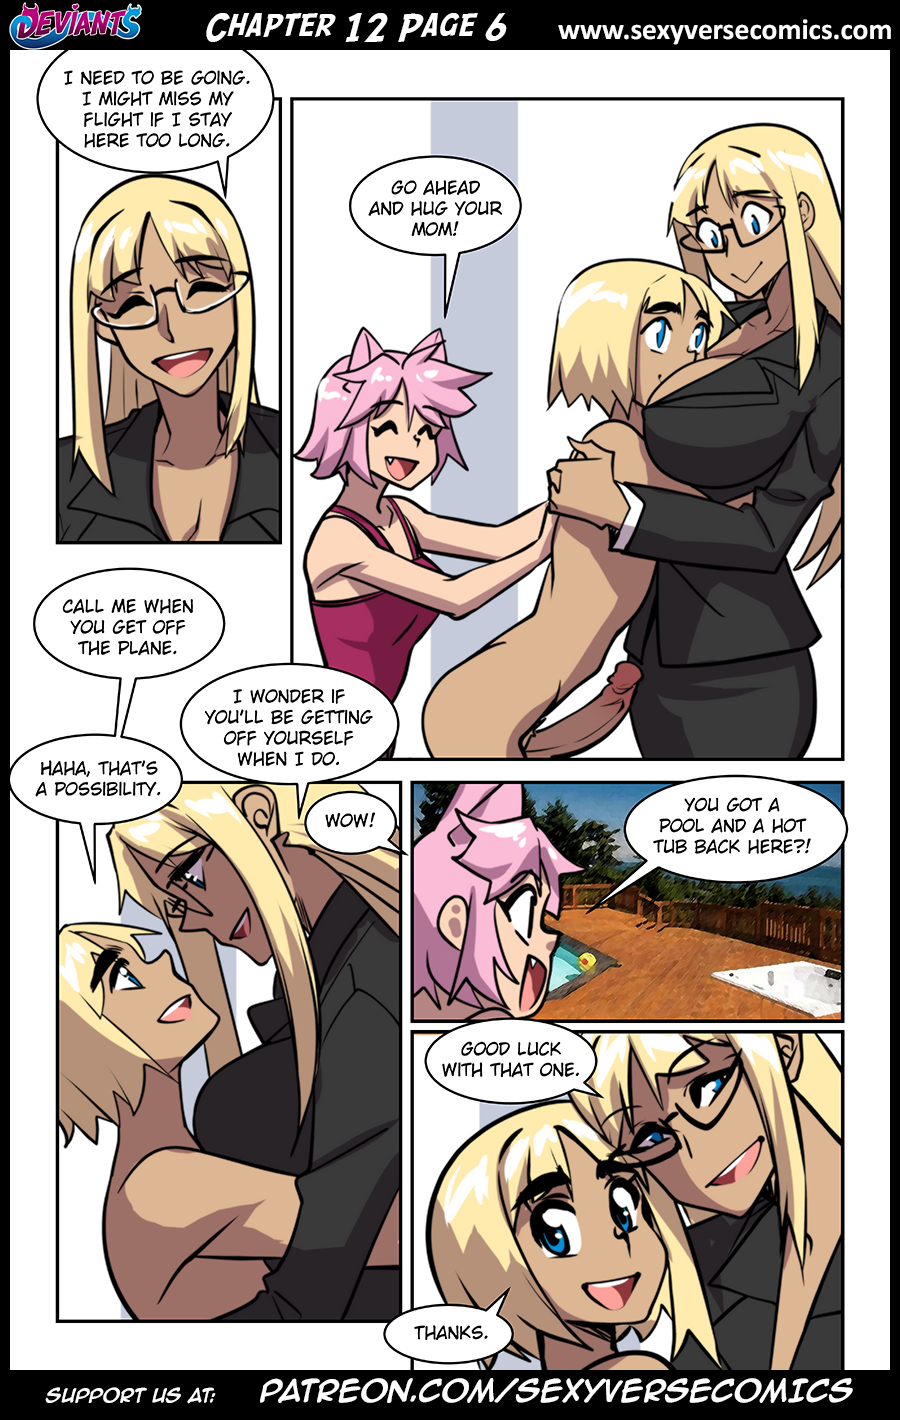 Deviants Chapter 12 Page 6